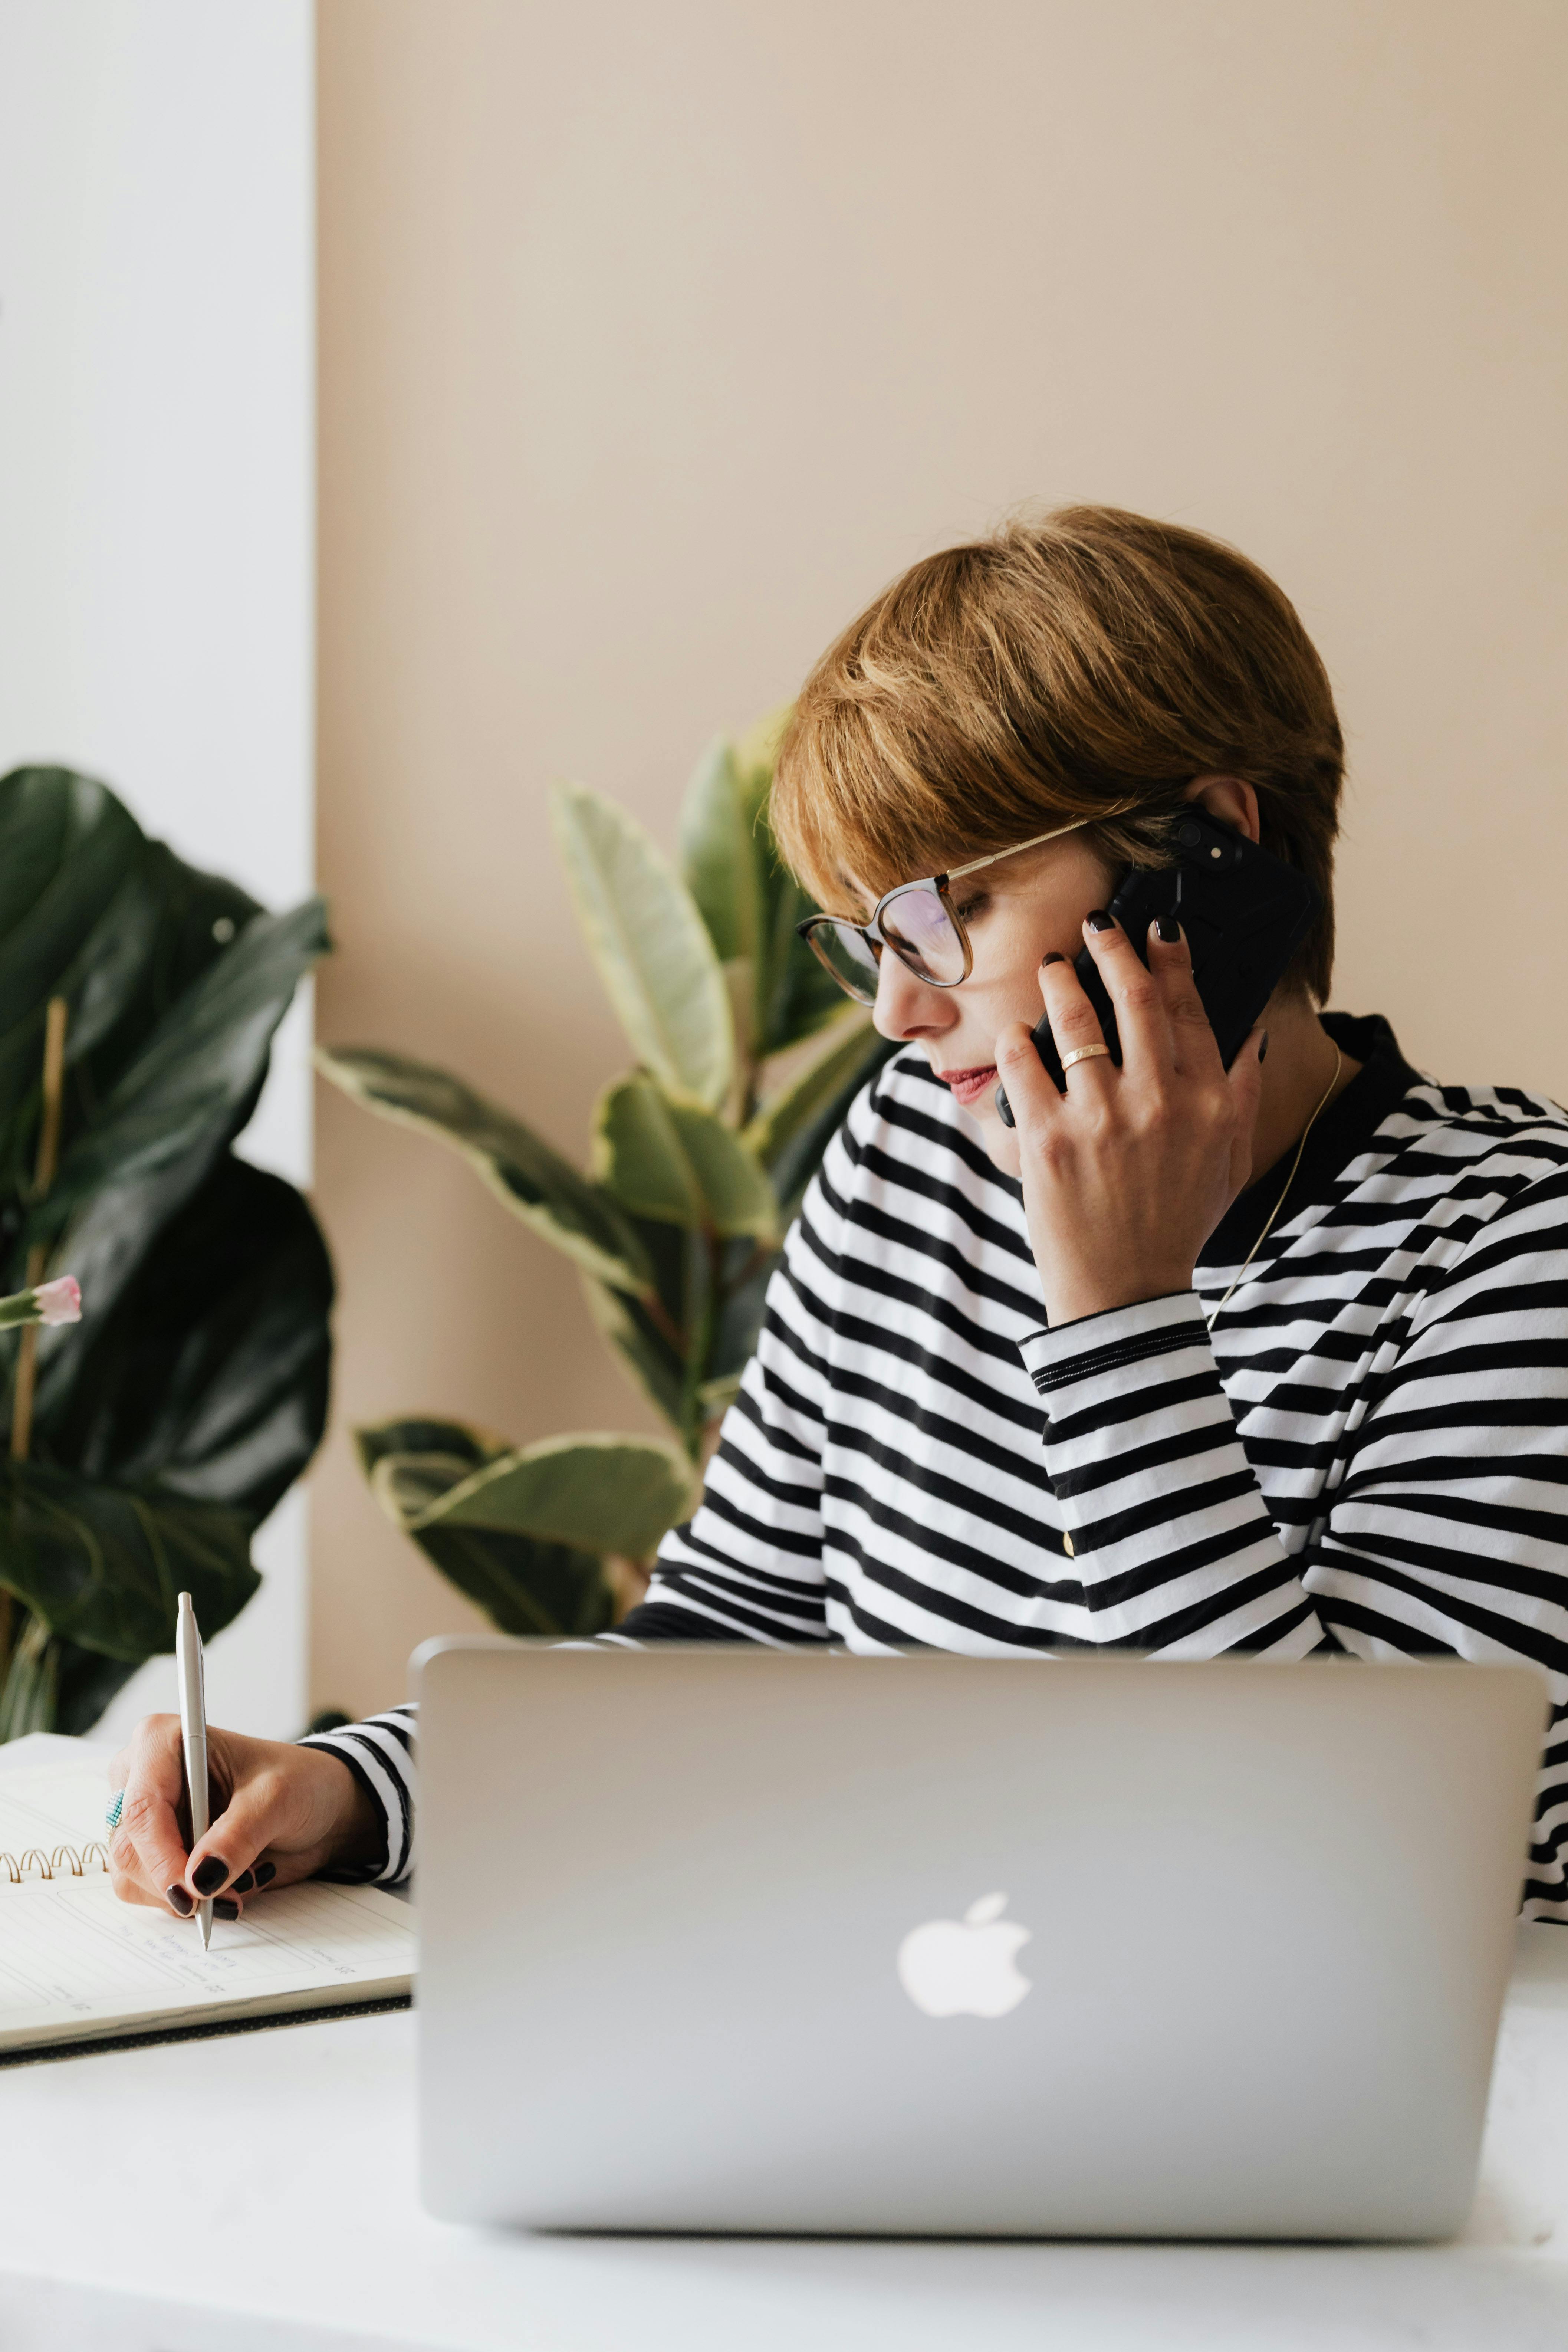 A woman talking on the phone | Source: Pexels